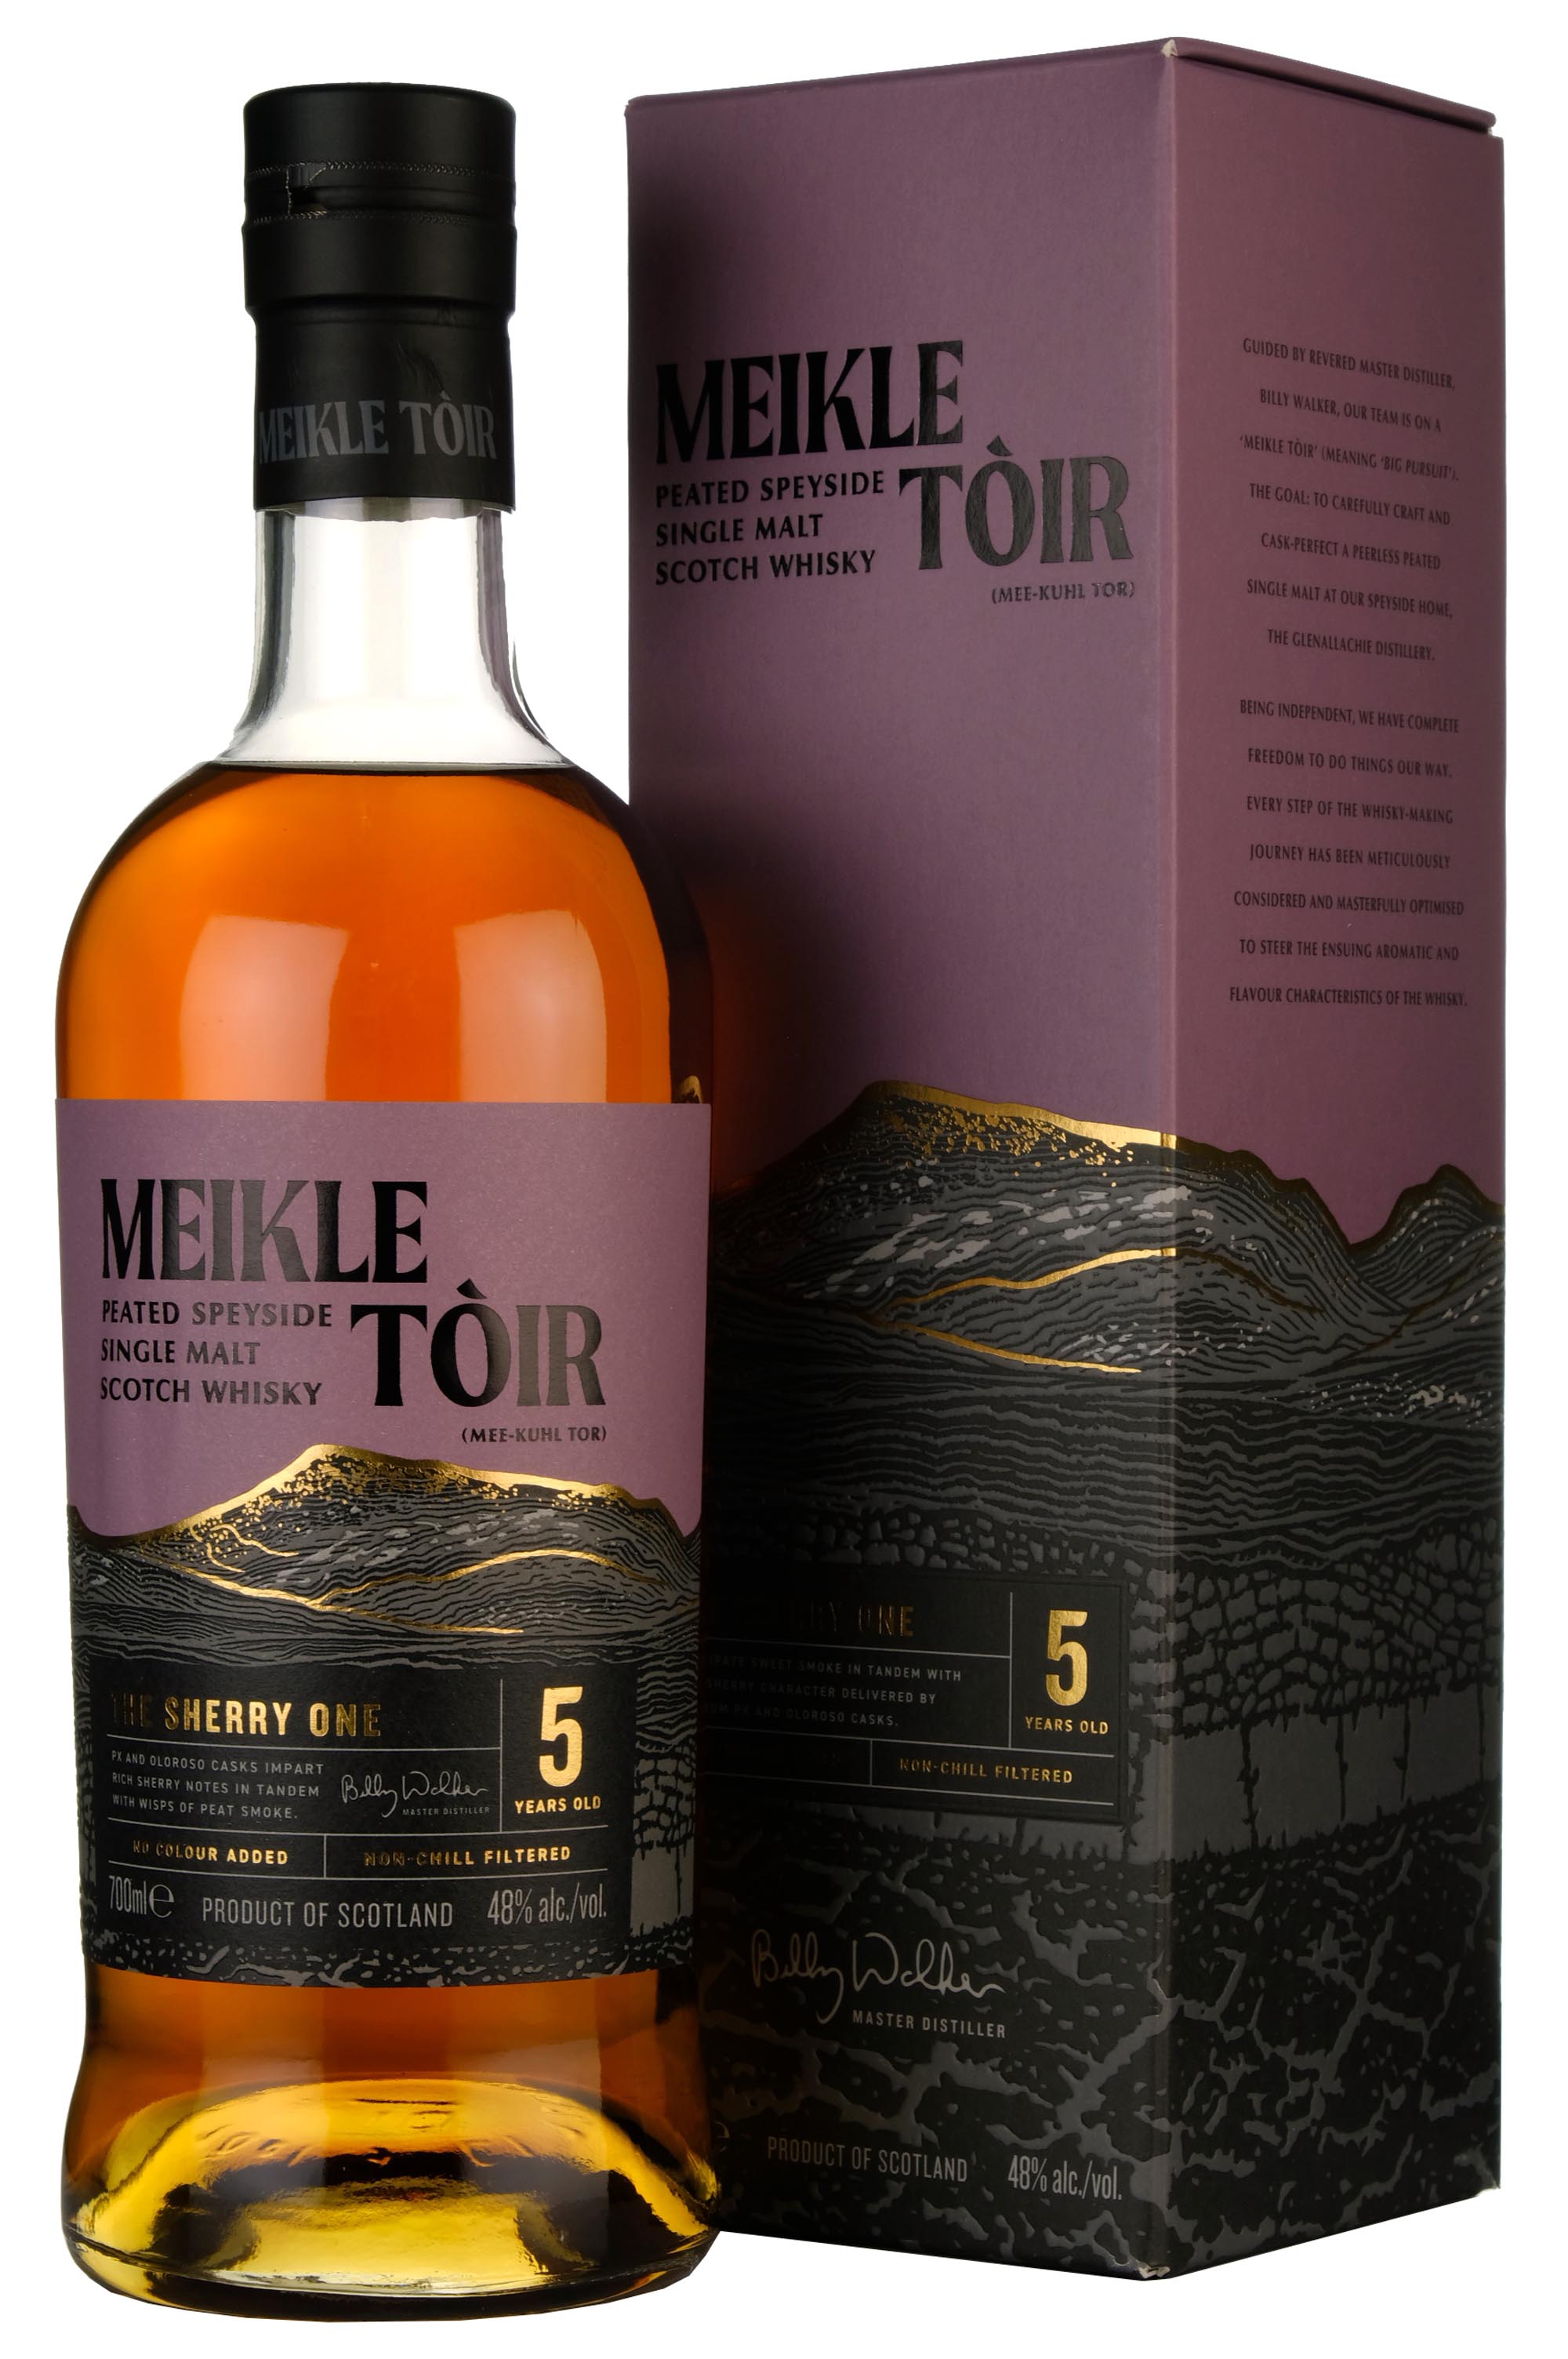 Meikle Toir 5 Year Old | The Sherry One